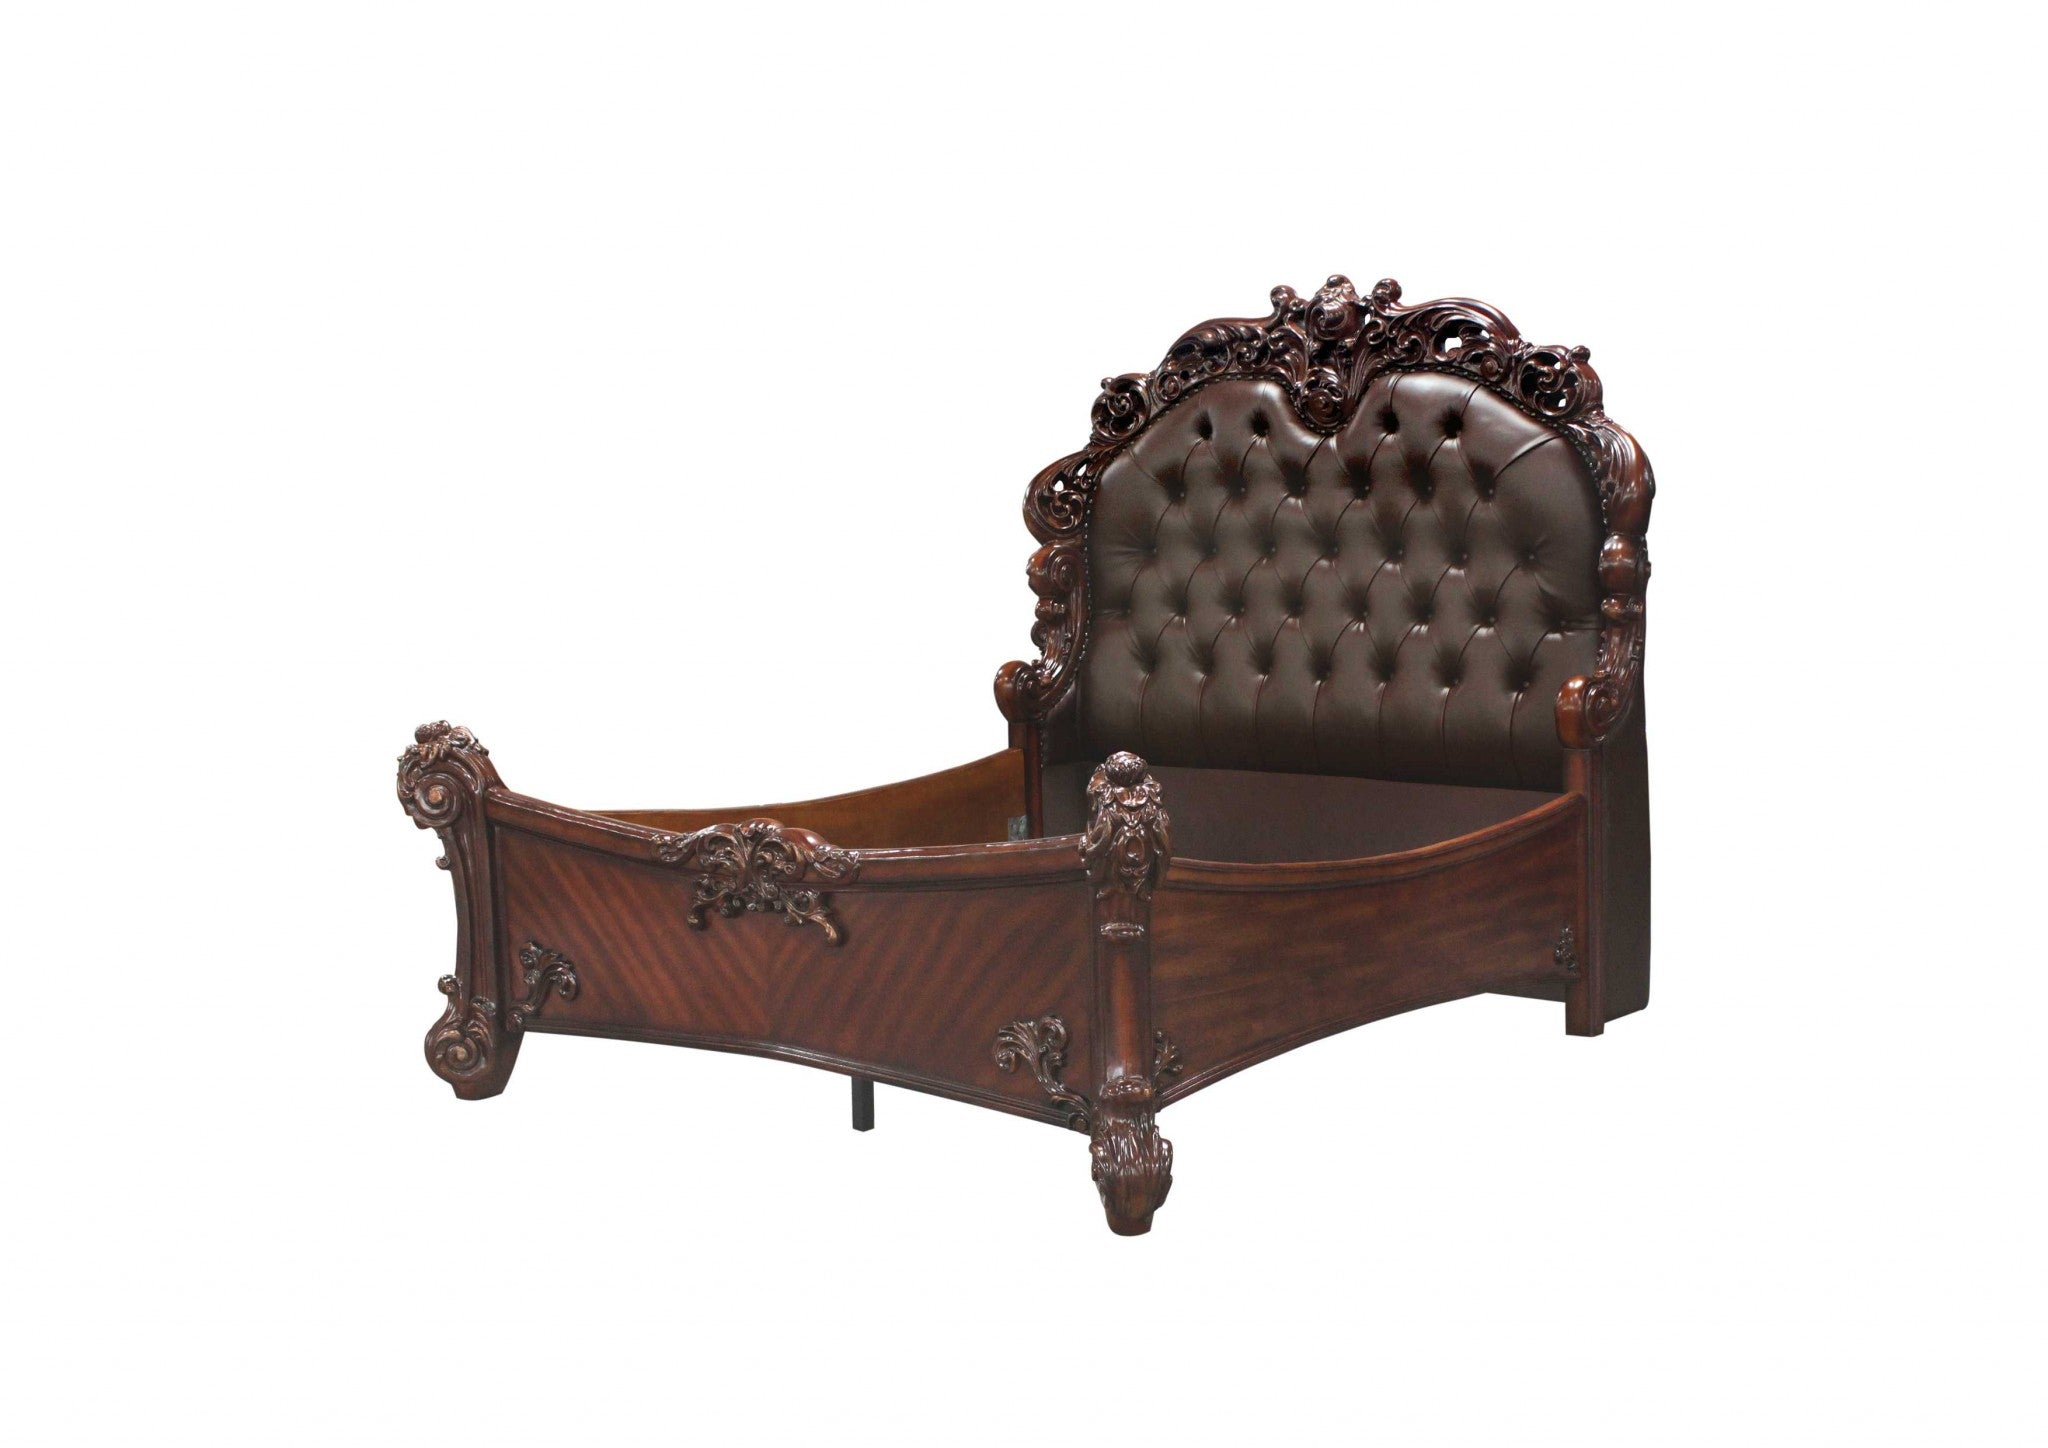 Queen Size Elaborately Carved Cherry Wood Finish Bed with Tufted Dark Faux Leather Headboard